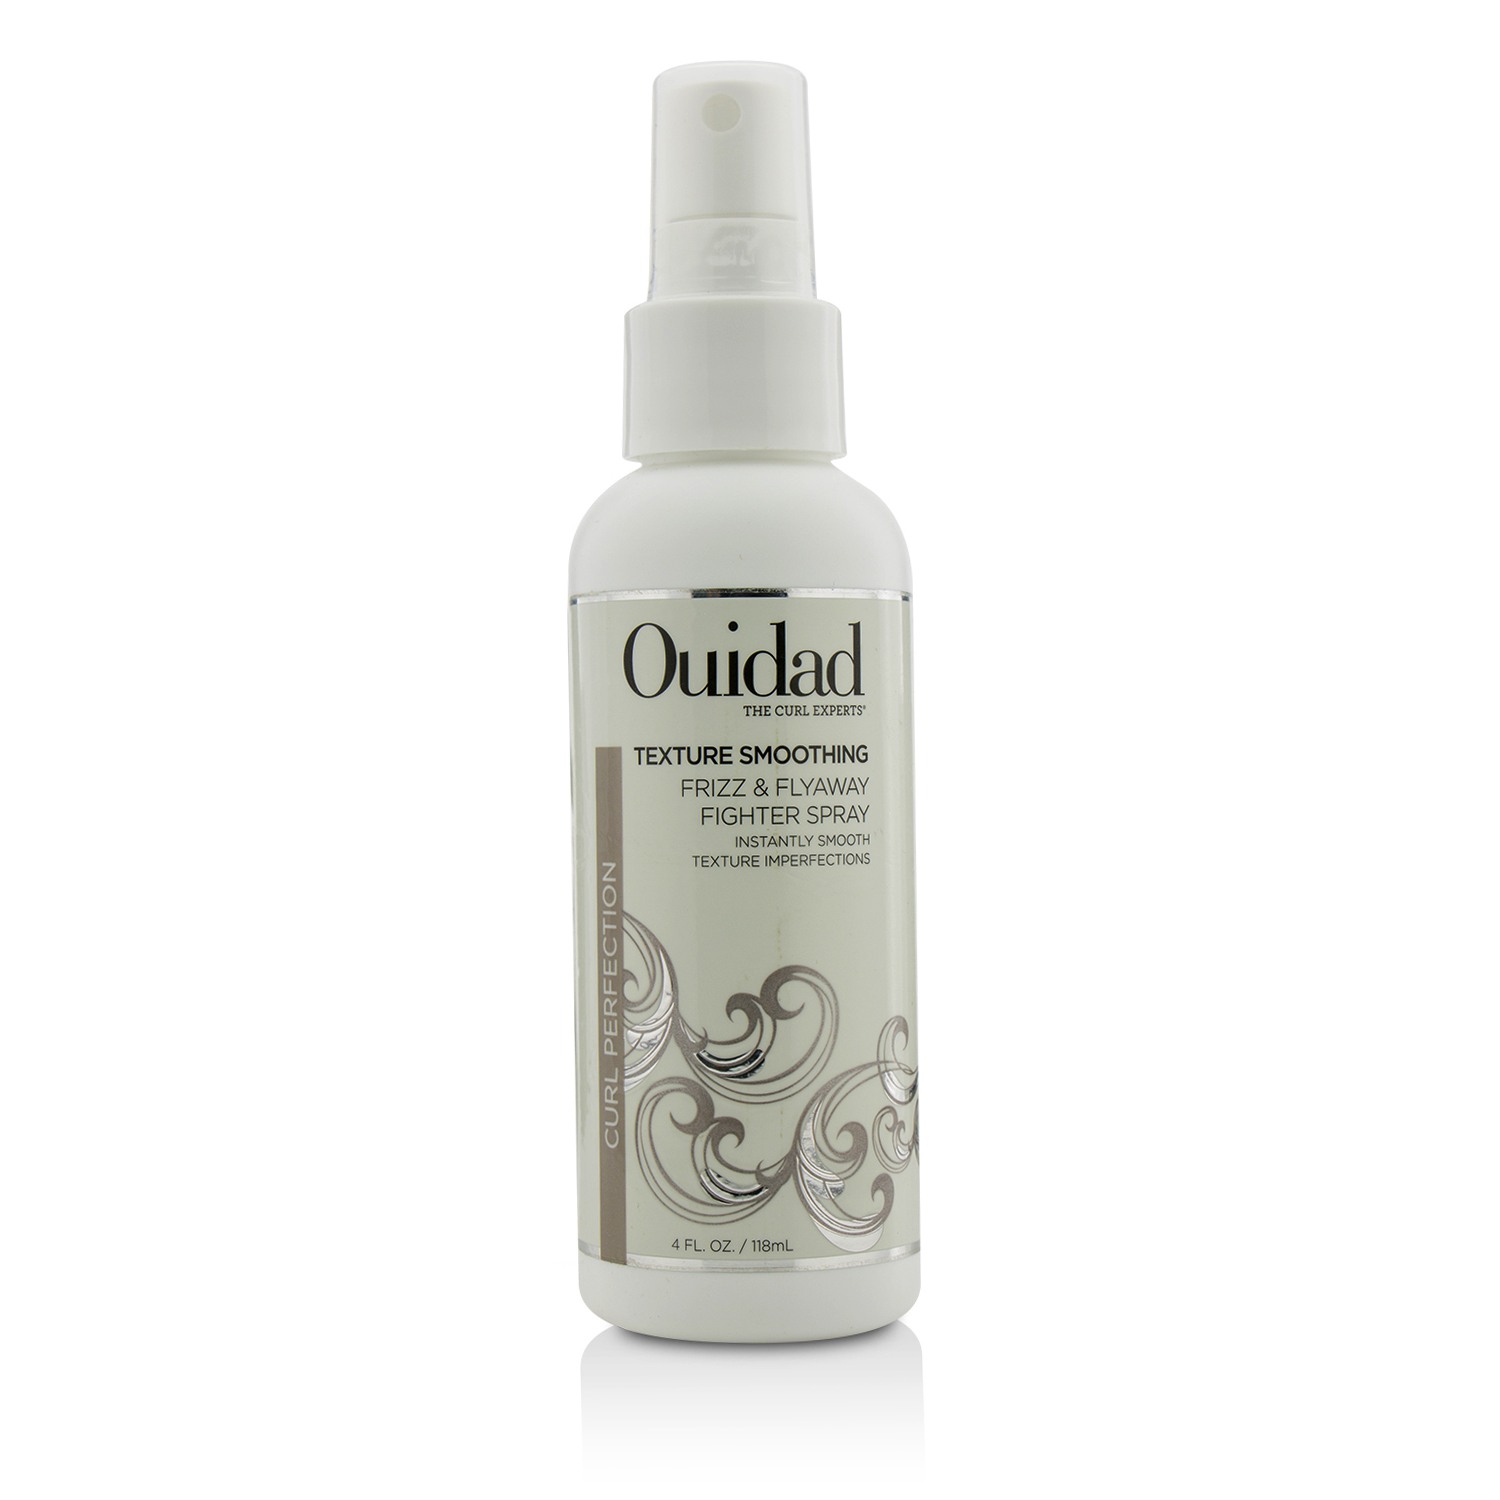 Texture Smoothing Frizz & Flyaway Fighter Spray (Curl Perfection) Ouidad Image